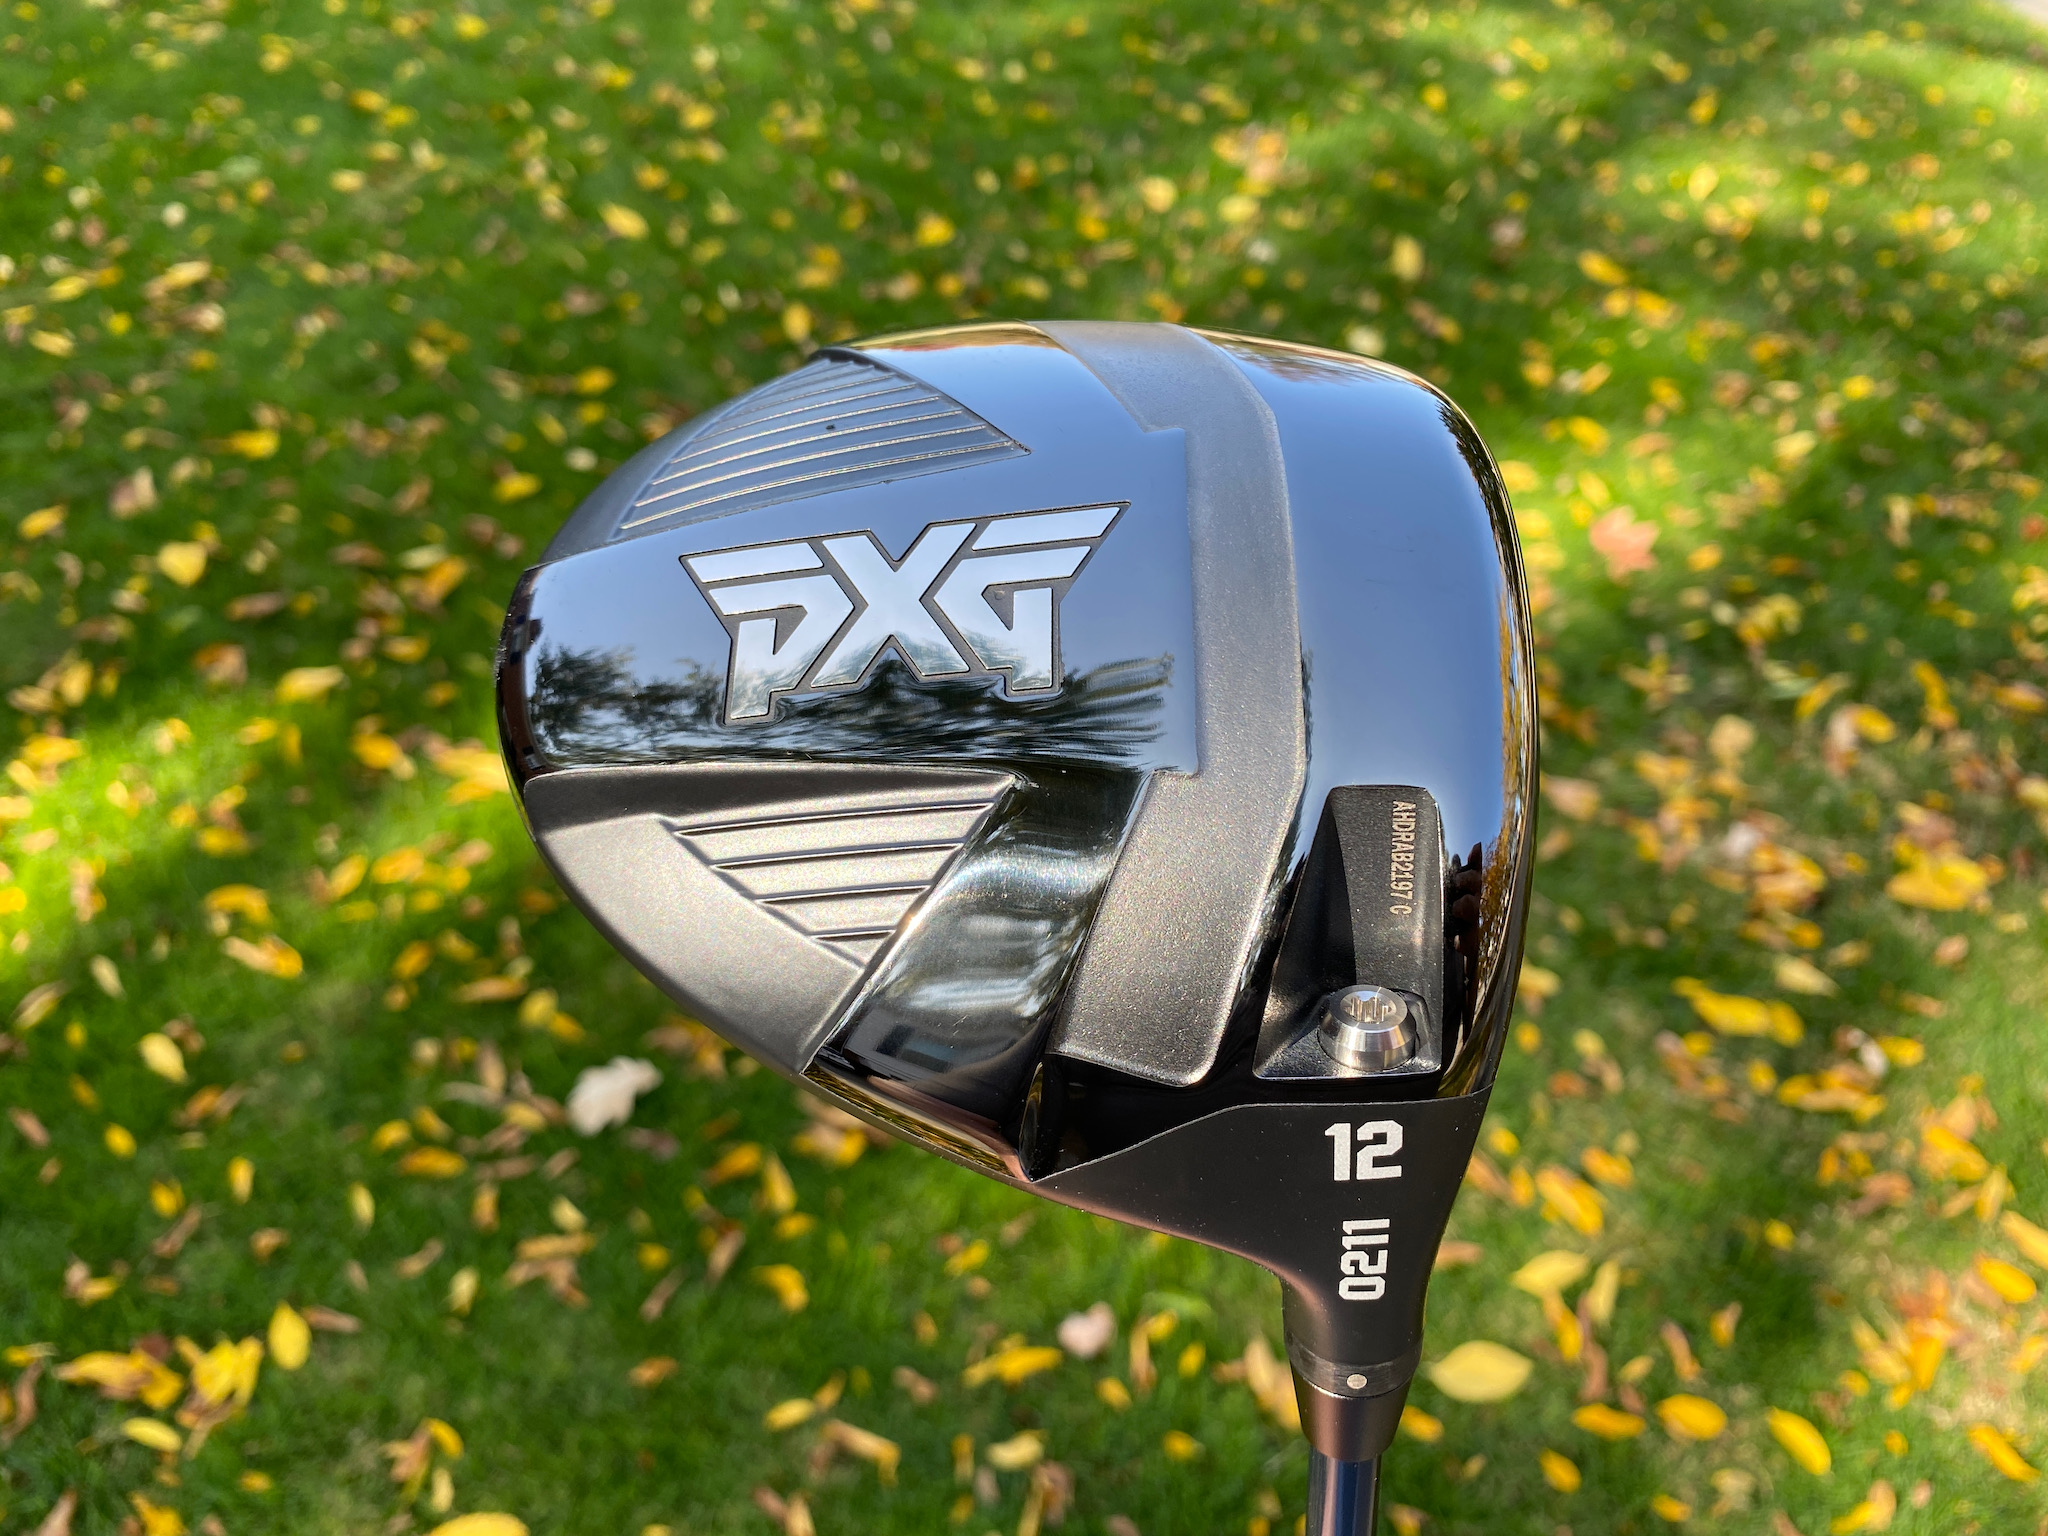 New 2022 PXG 0211 woods: What you need to know – GolfWRX